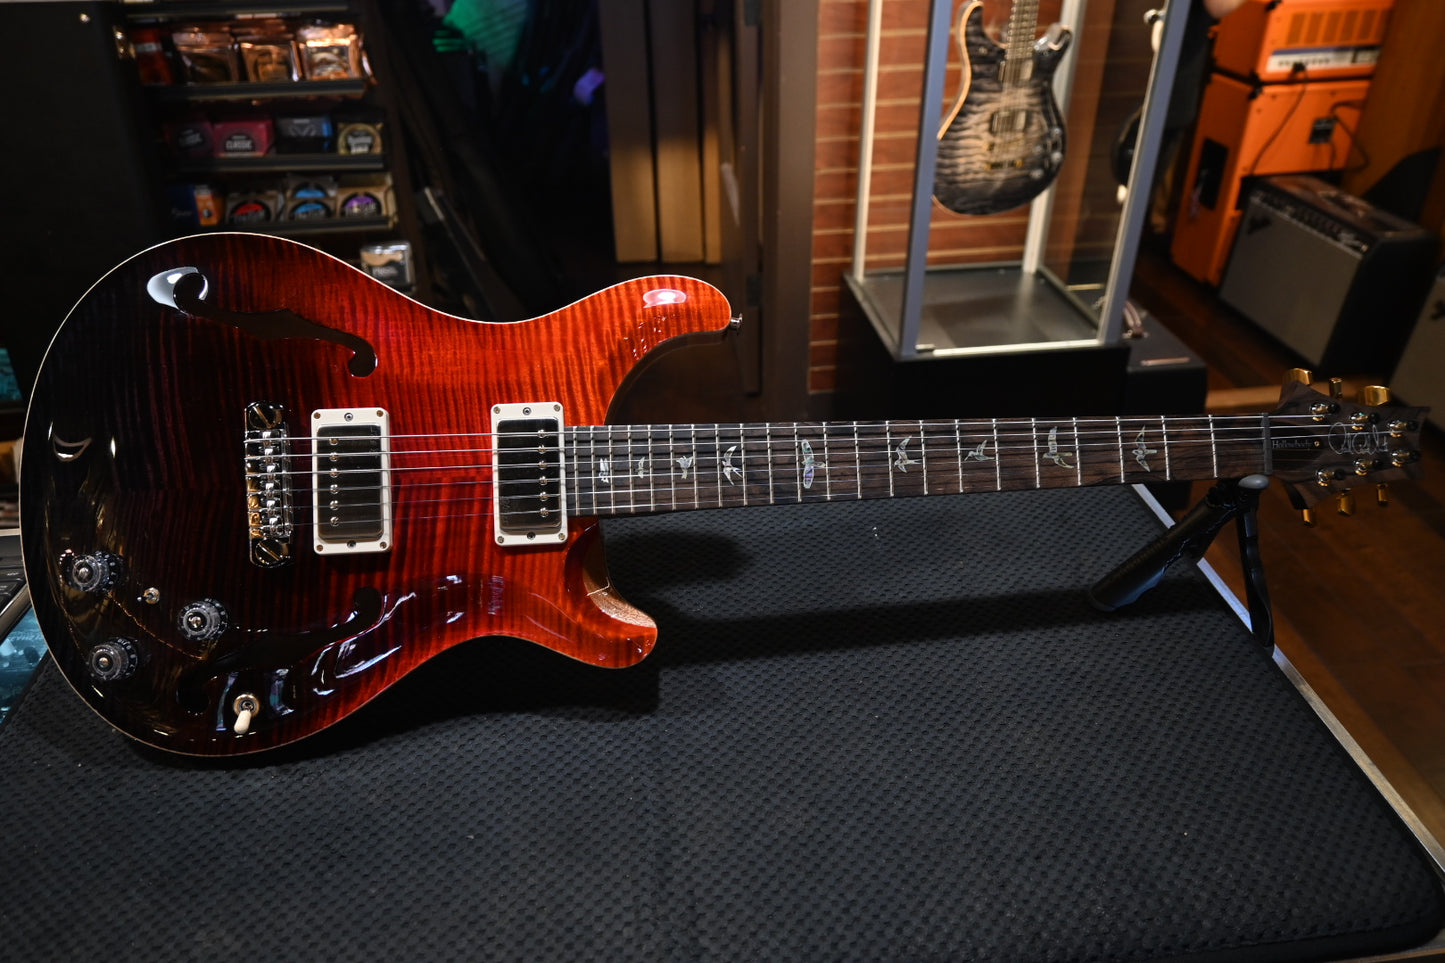 PRS Wood Library Hollowbody II Piezo 10-Top Rosewood Neck - Fire Red to Grey Black Fade Guitar #4365 - Danville Music